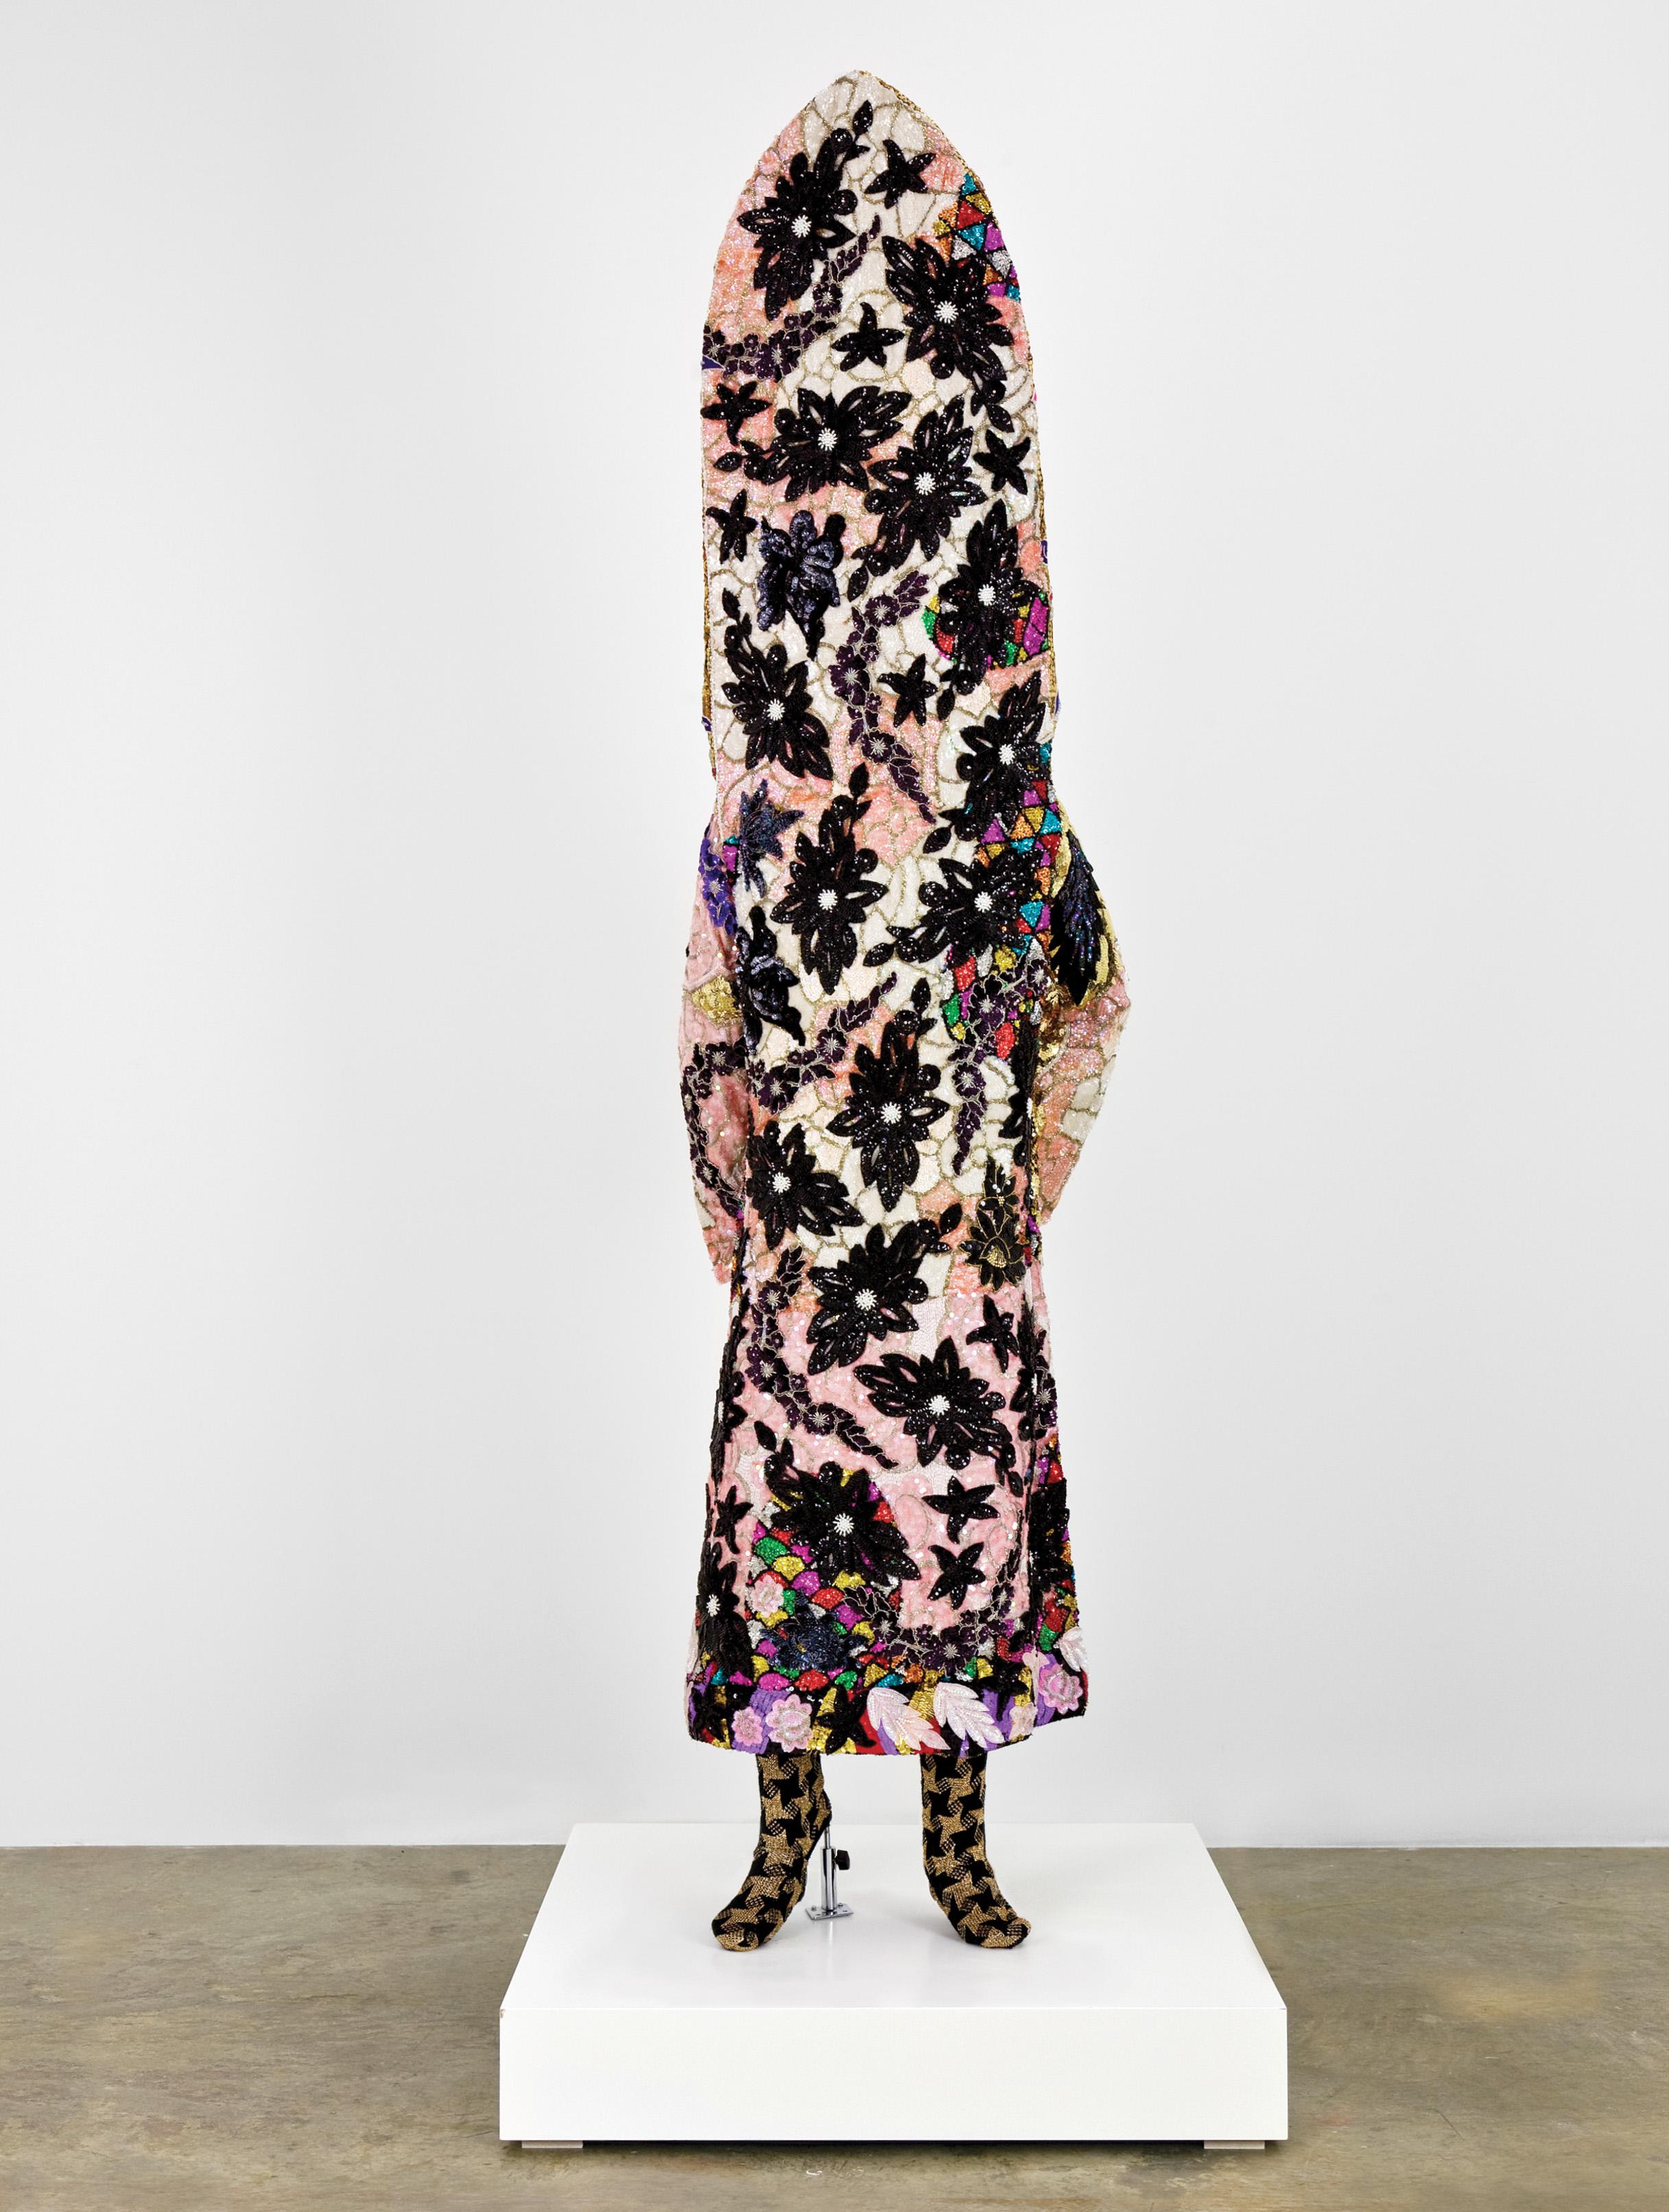 One of artist Nick Cave's Soundsuits, made of fabric, sequins, fiberglass, and metal.